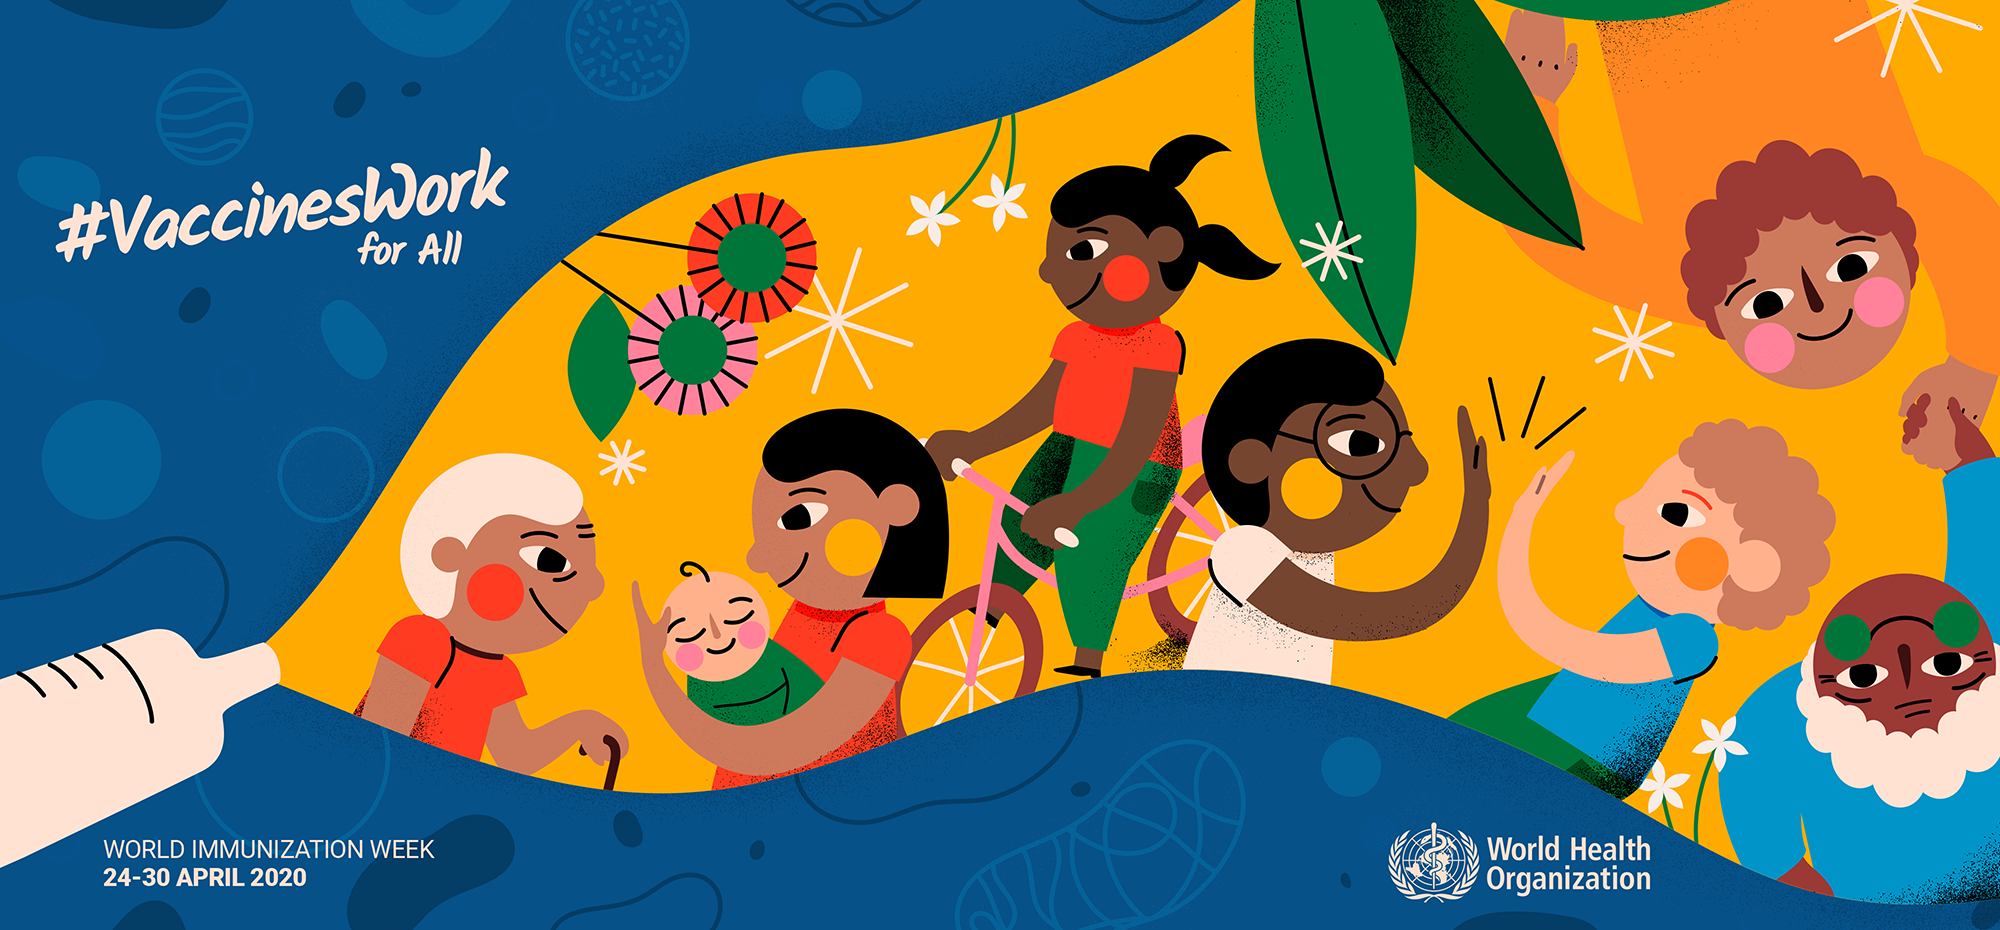 Illustration for #VaccinesWork for All campaign: happy people coming out of an syringe